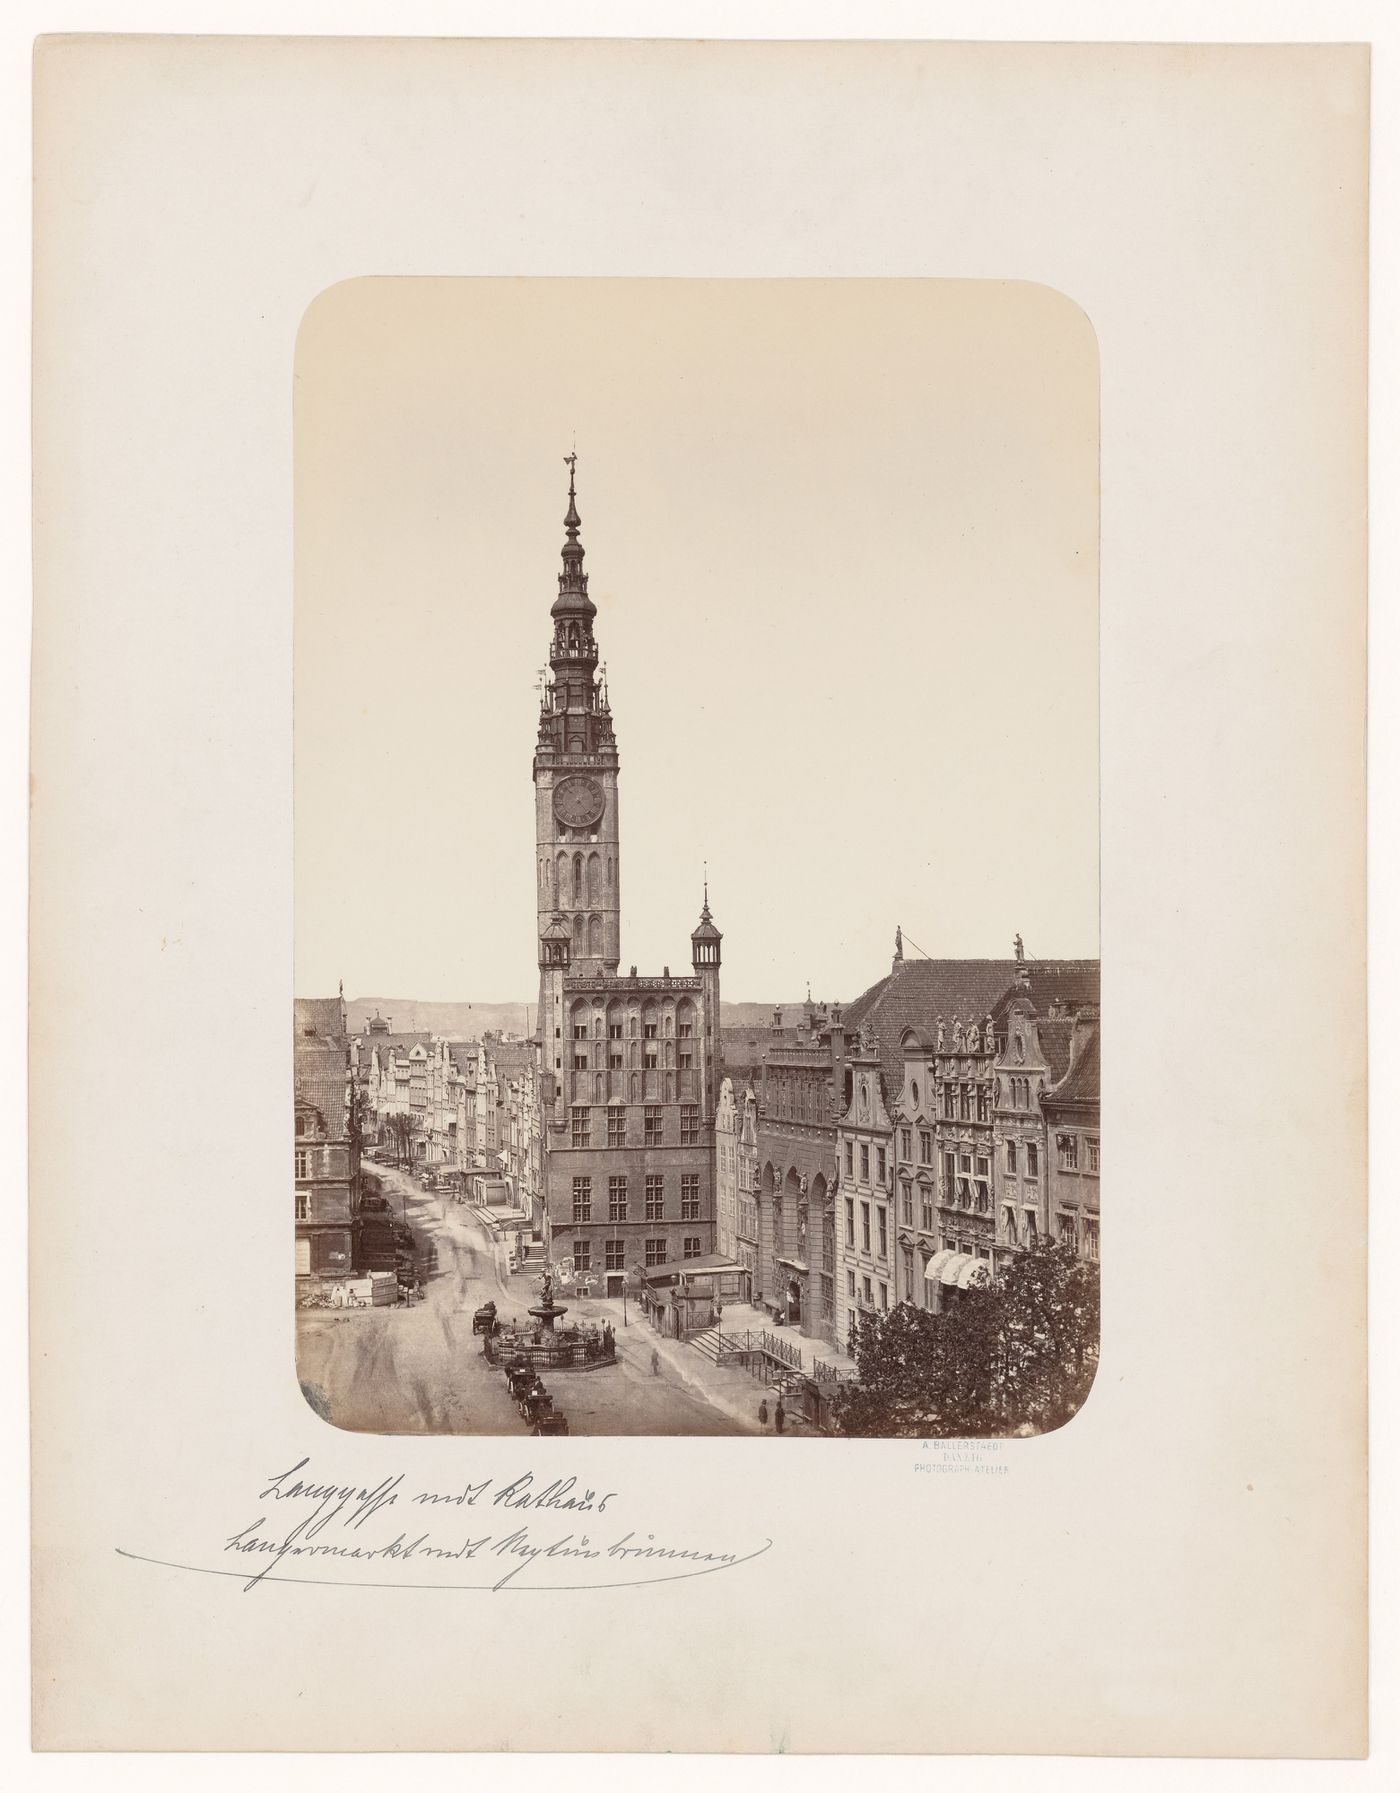 View of the main street and market showing the town hall and fountain, Danzig, Germany